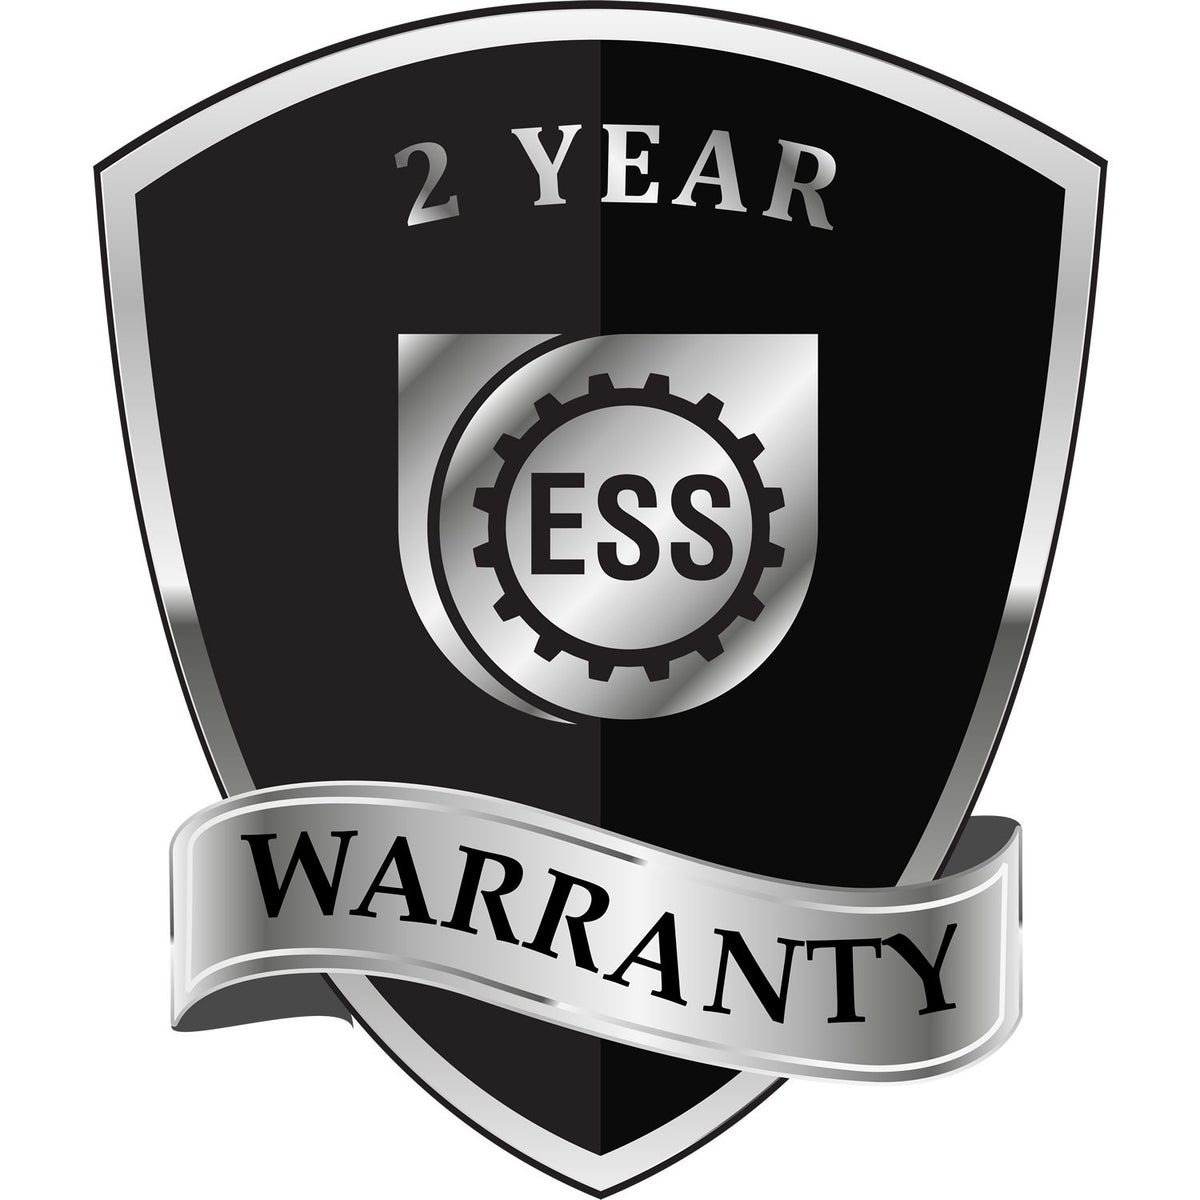 A black and silver badge or emblem showing warranty information for the State of Oklahoma Extended Long Reach Geologist Seal